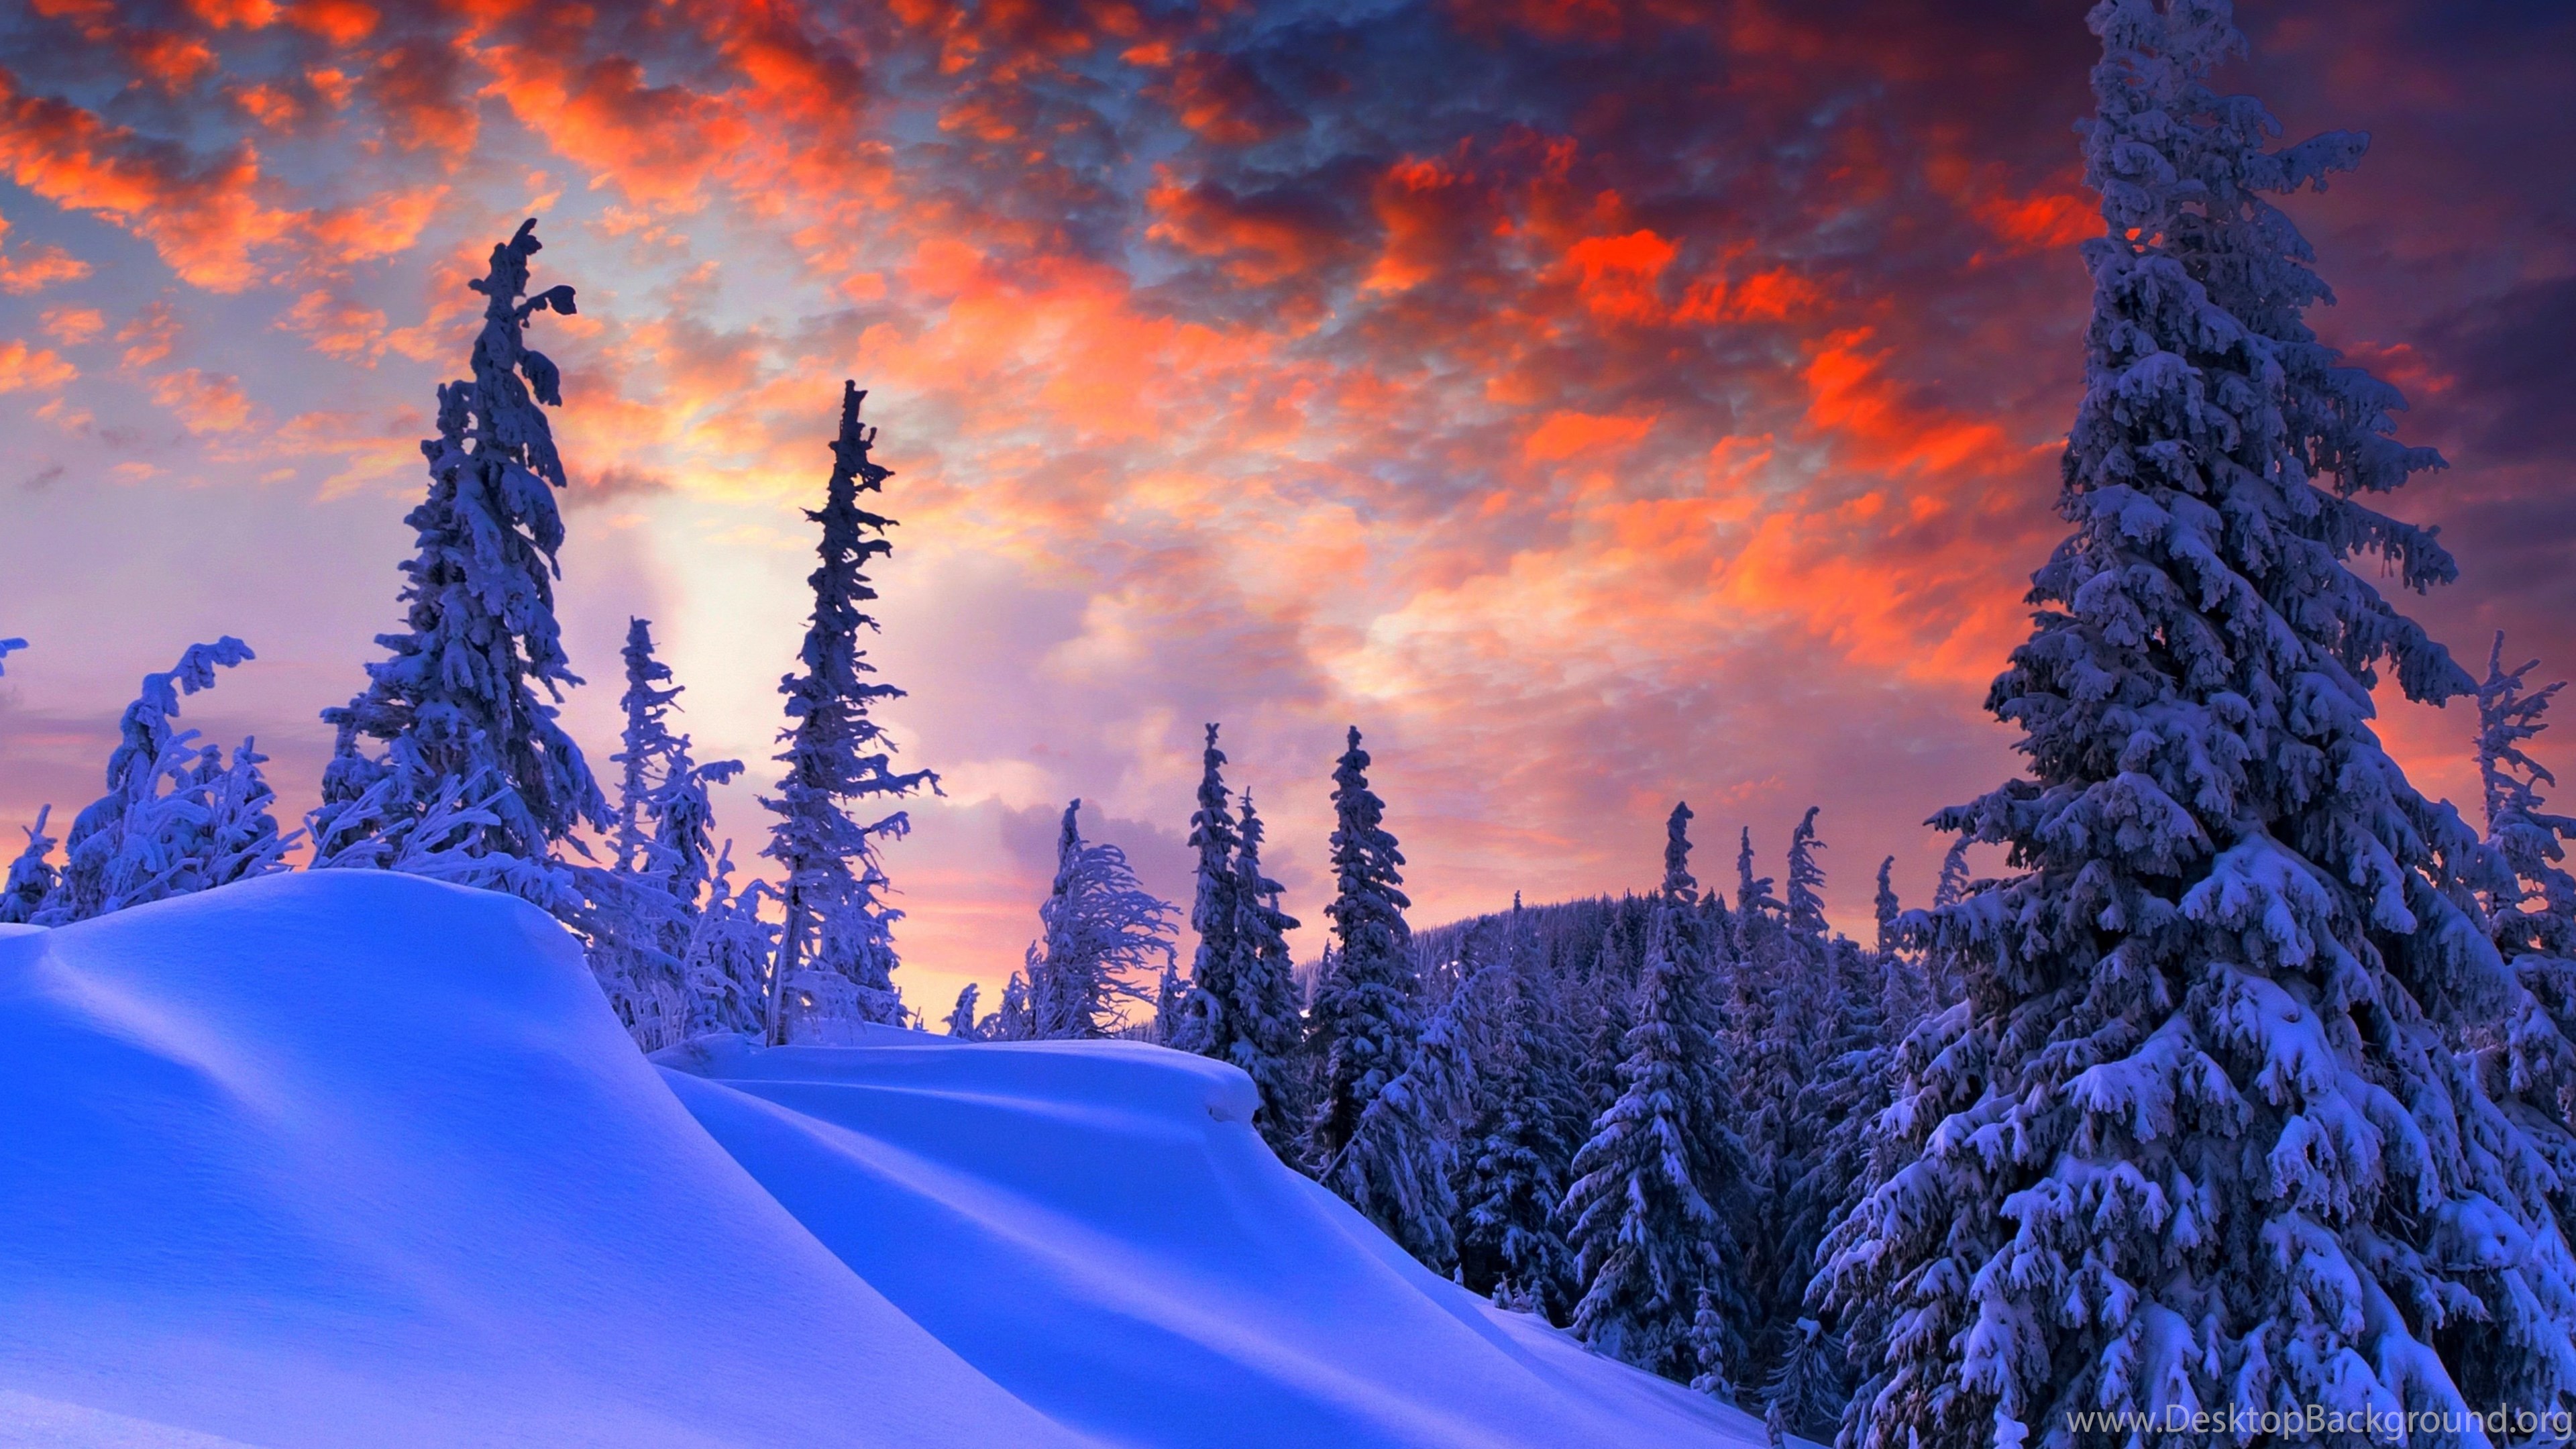  Winter  Christmas Wallpapers  Full HD  7500x3000 Free 